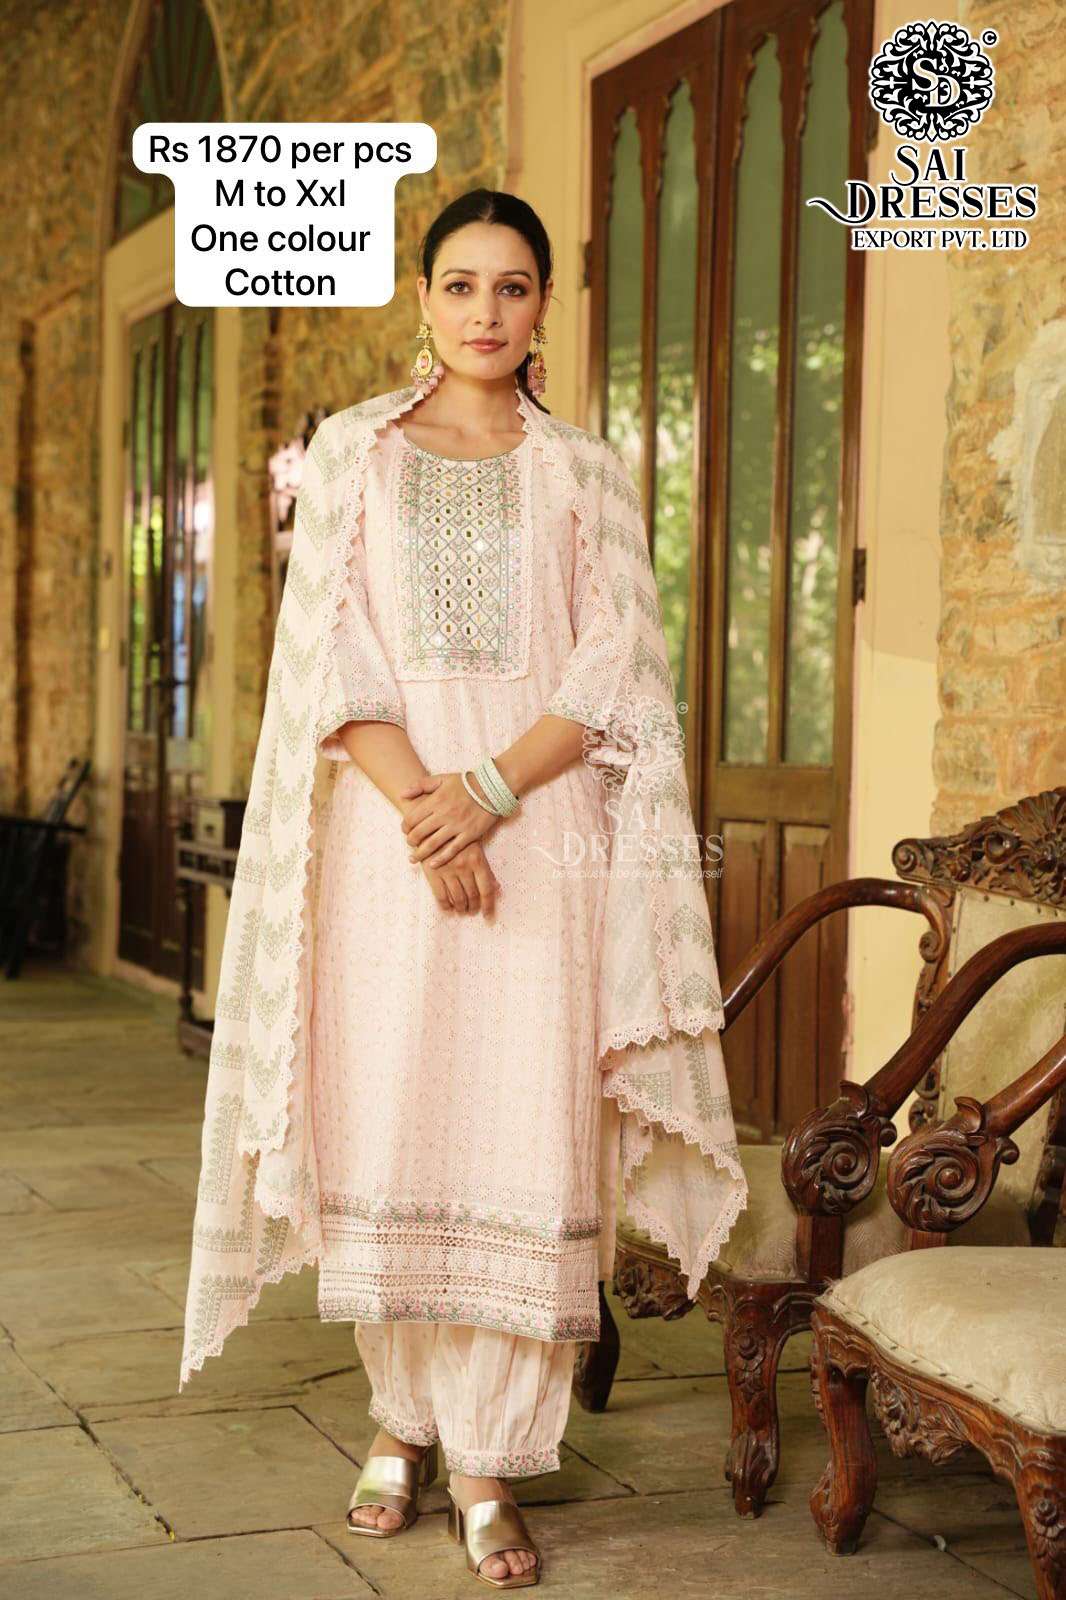 SAI DRESSES PRESENT D.NO 4025 READY TO WEAR SCHIFFLI COTTON WITH AFGHANI PANT STYLE PAKISTANI 3 PIECE CONCEPT COMBO COLLECTION IN WHOLESALE RATE IN SURAT